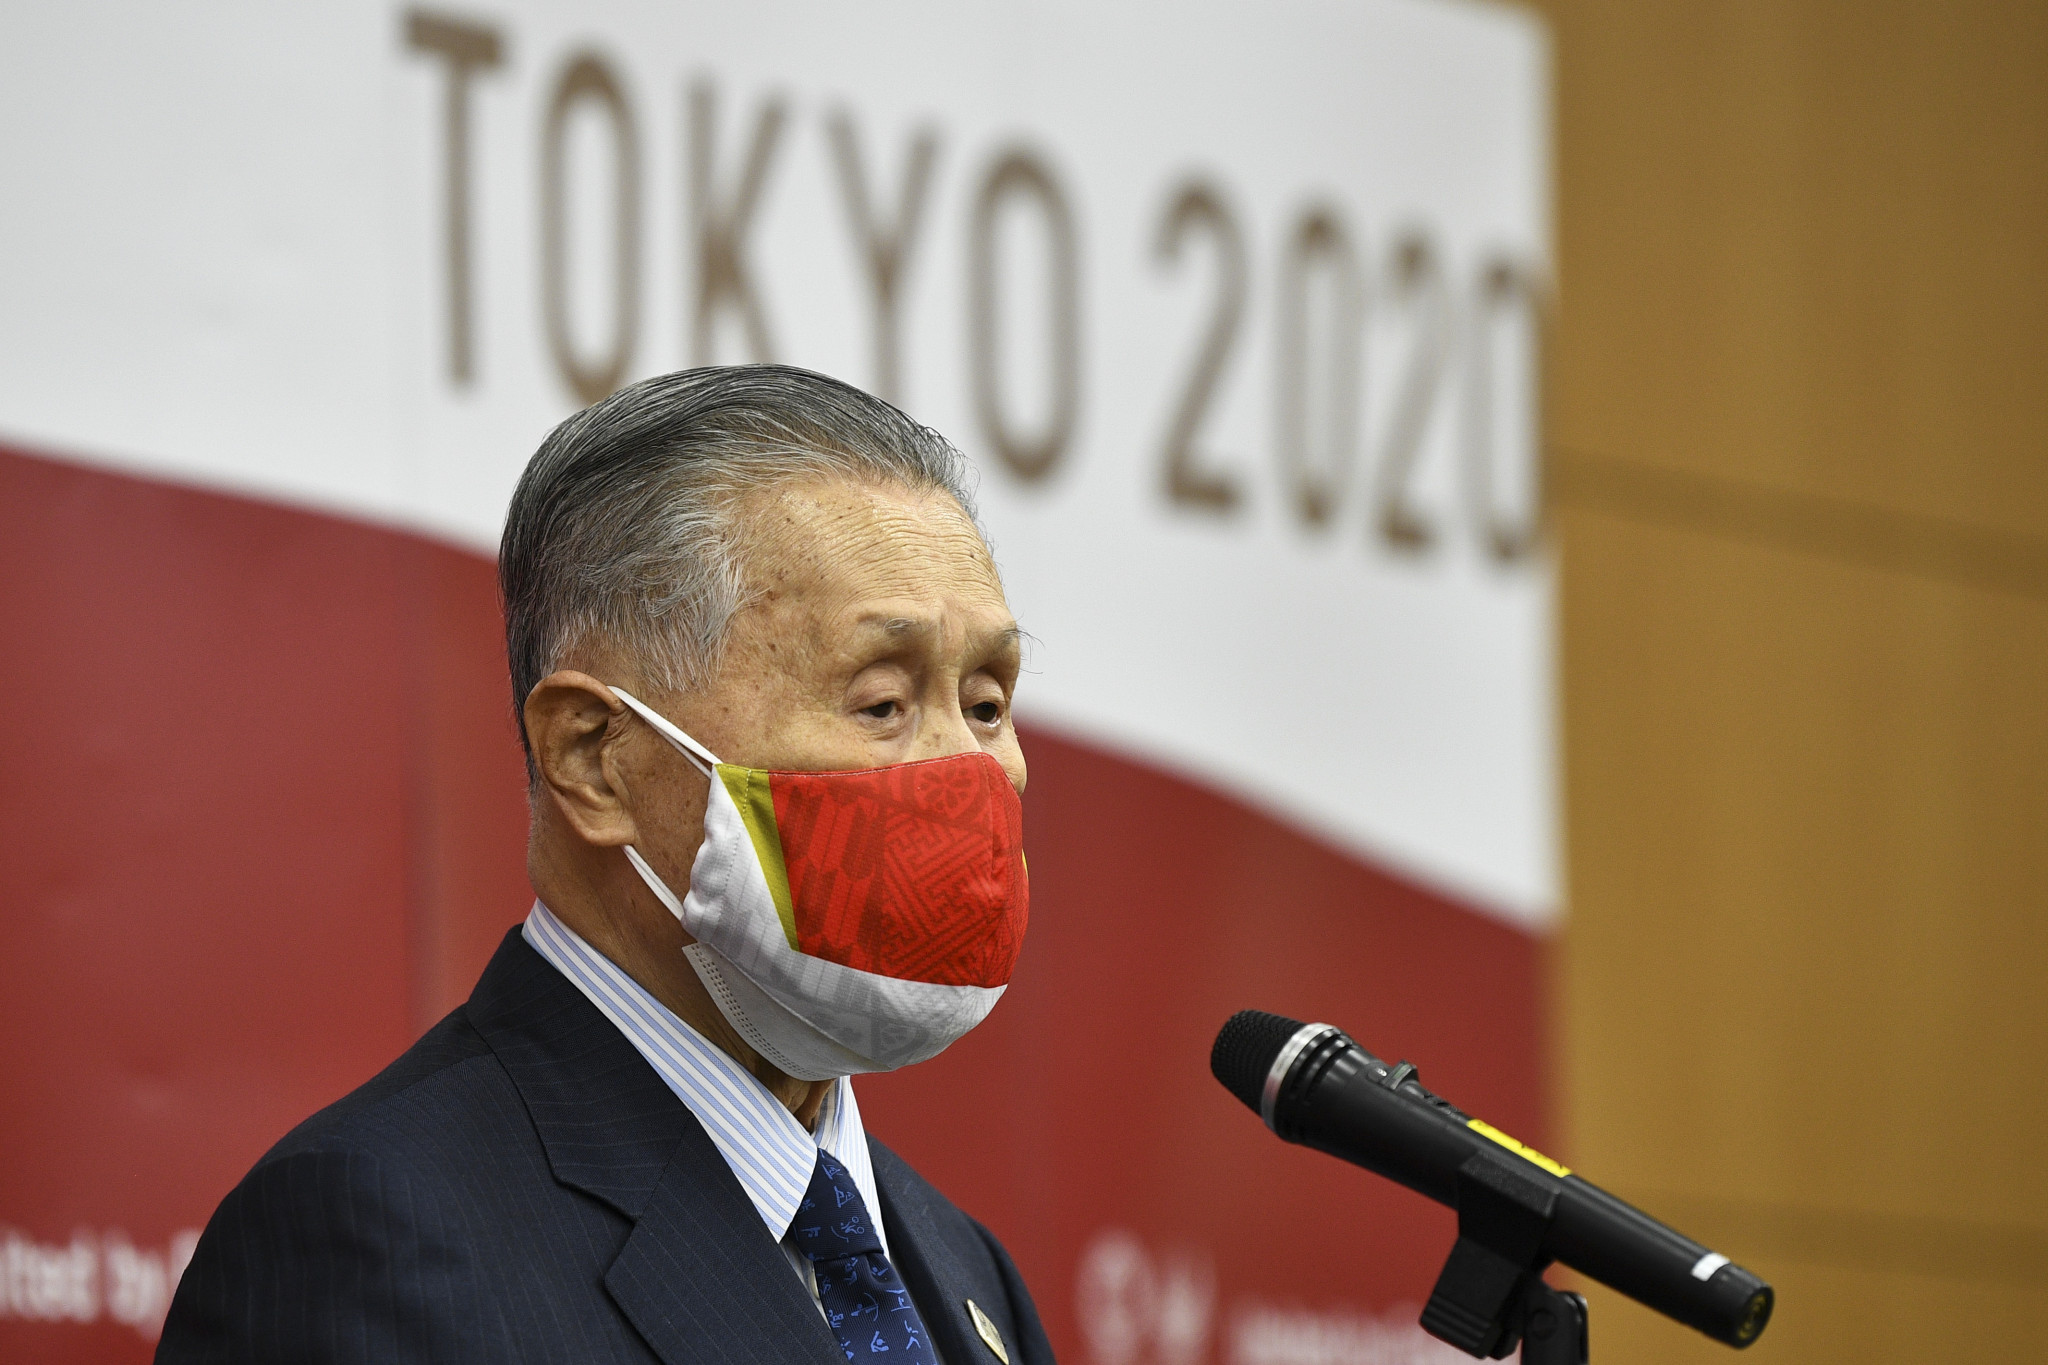 Tokyo 2020 President Yoshirō Mori claimed a decision on spectators at Tokyo 2020 will be made in March ©Getty Images